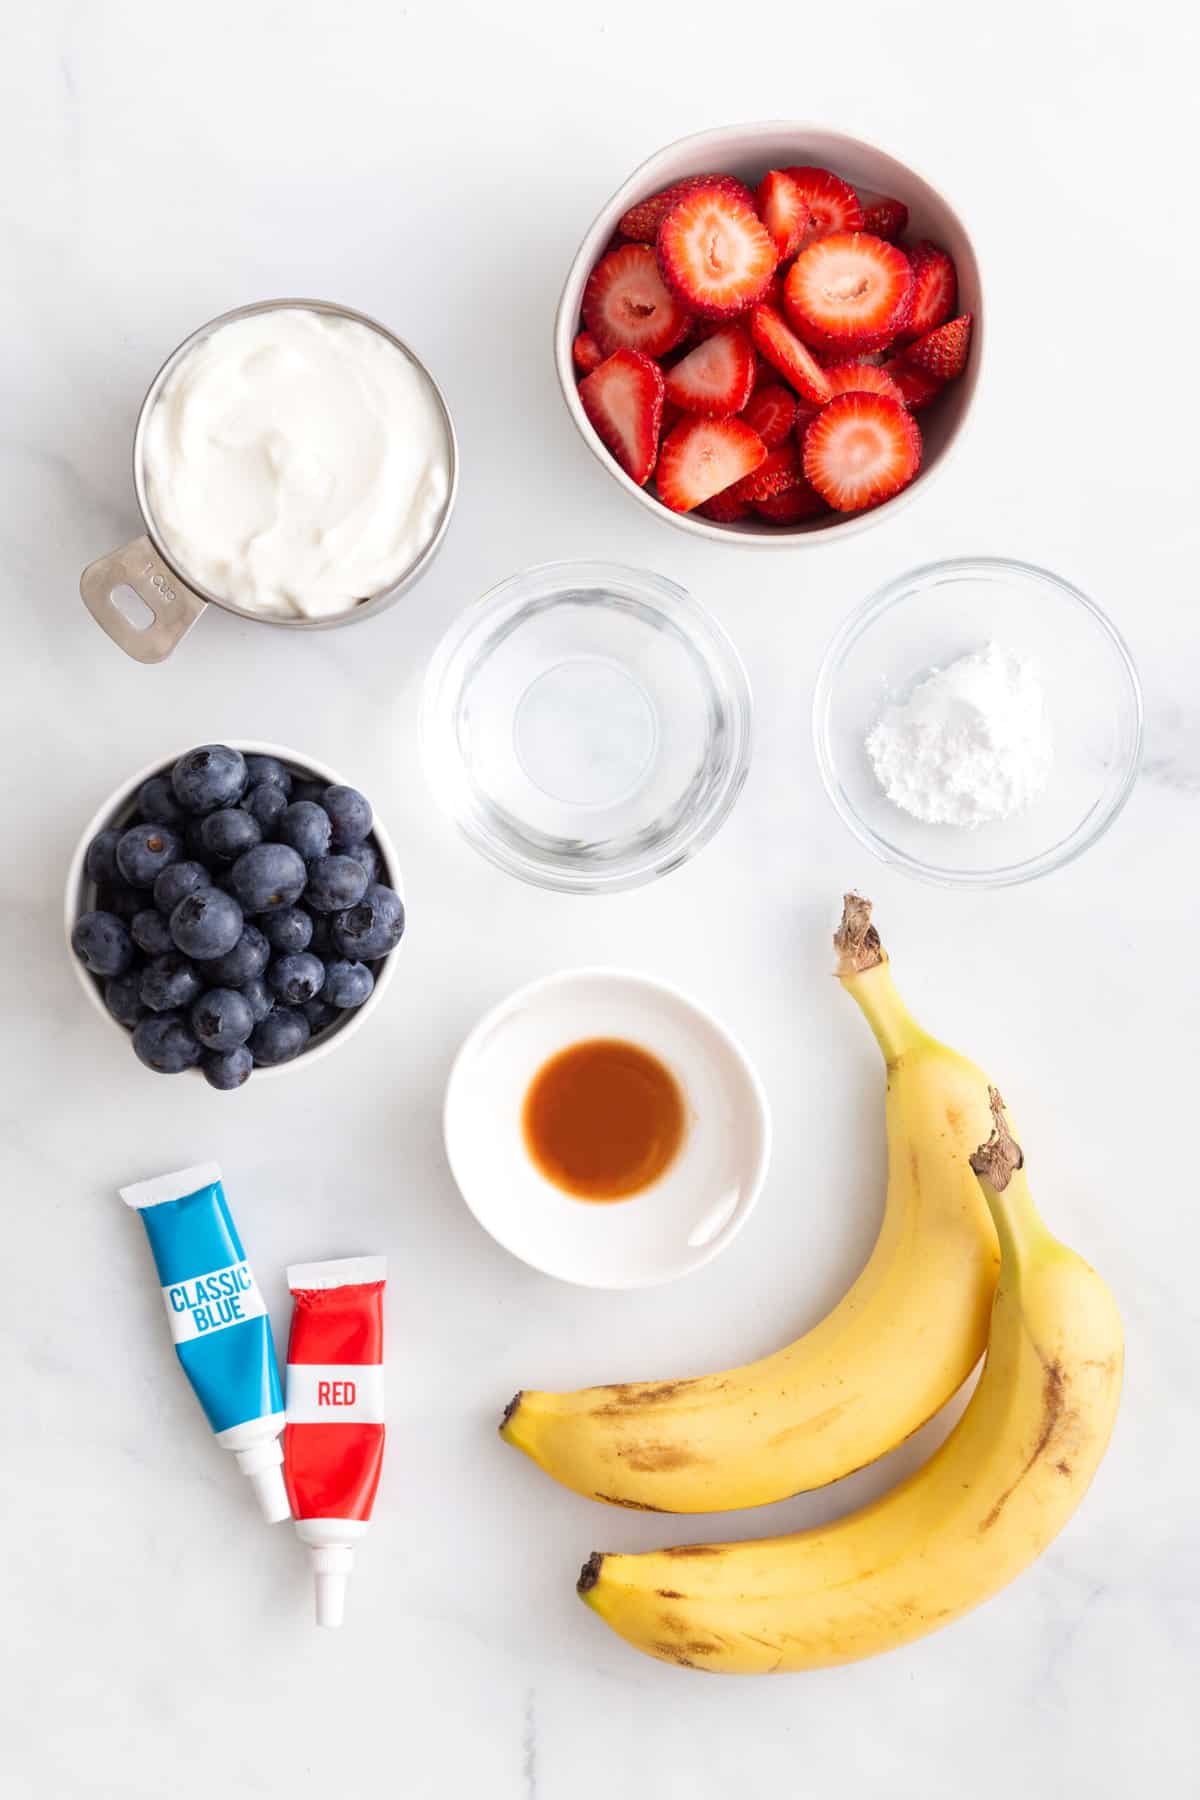 ingredients to make red, white and blue popsicles with fresh fruit